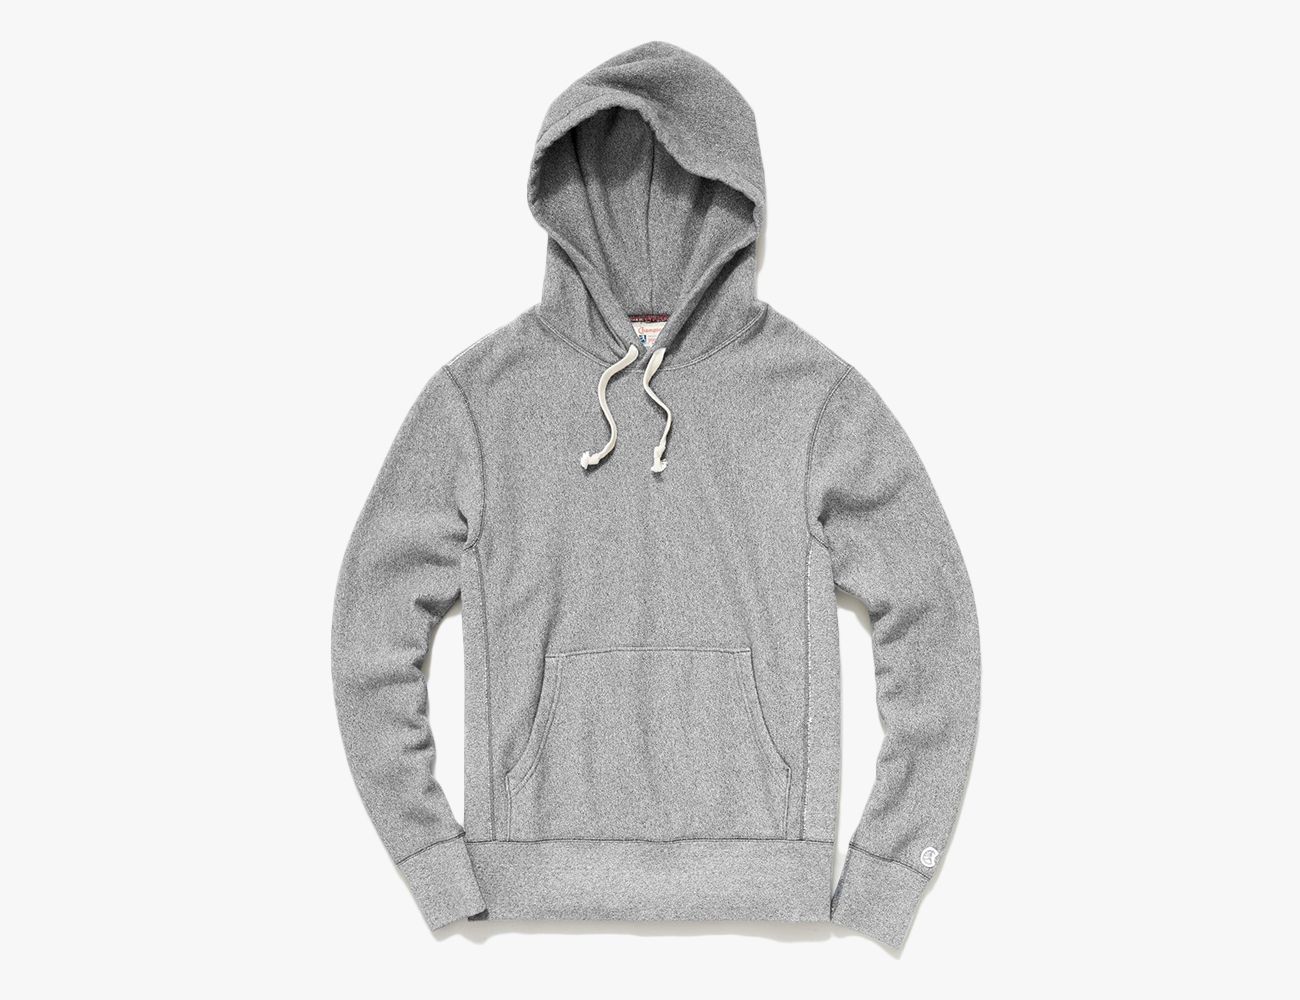 23 Best Hoodies for Men in 2023, Per Style Experts